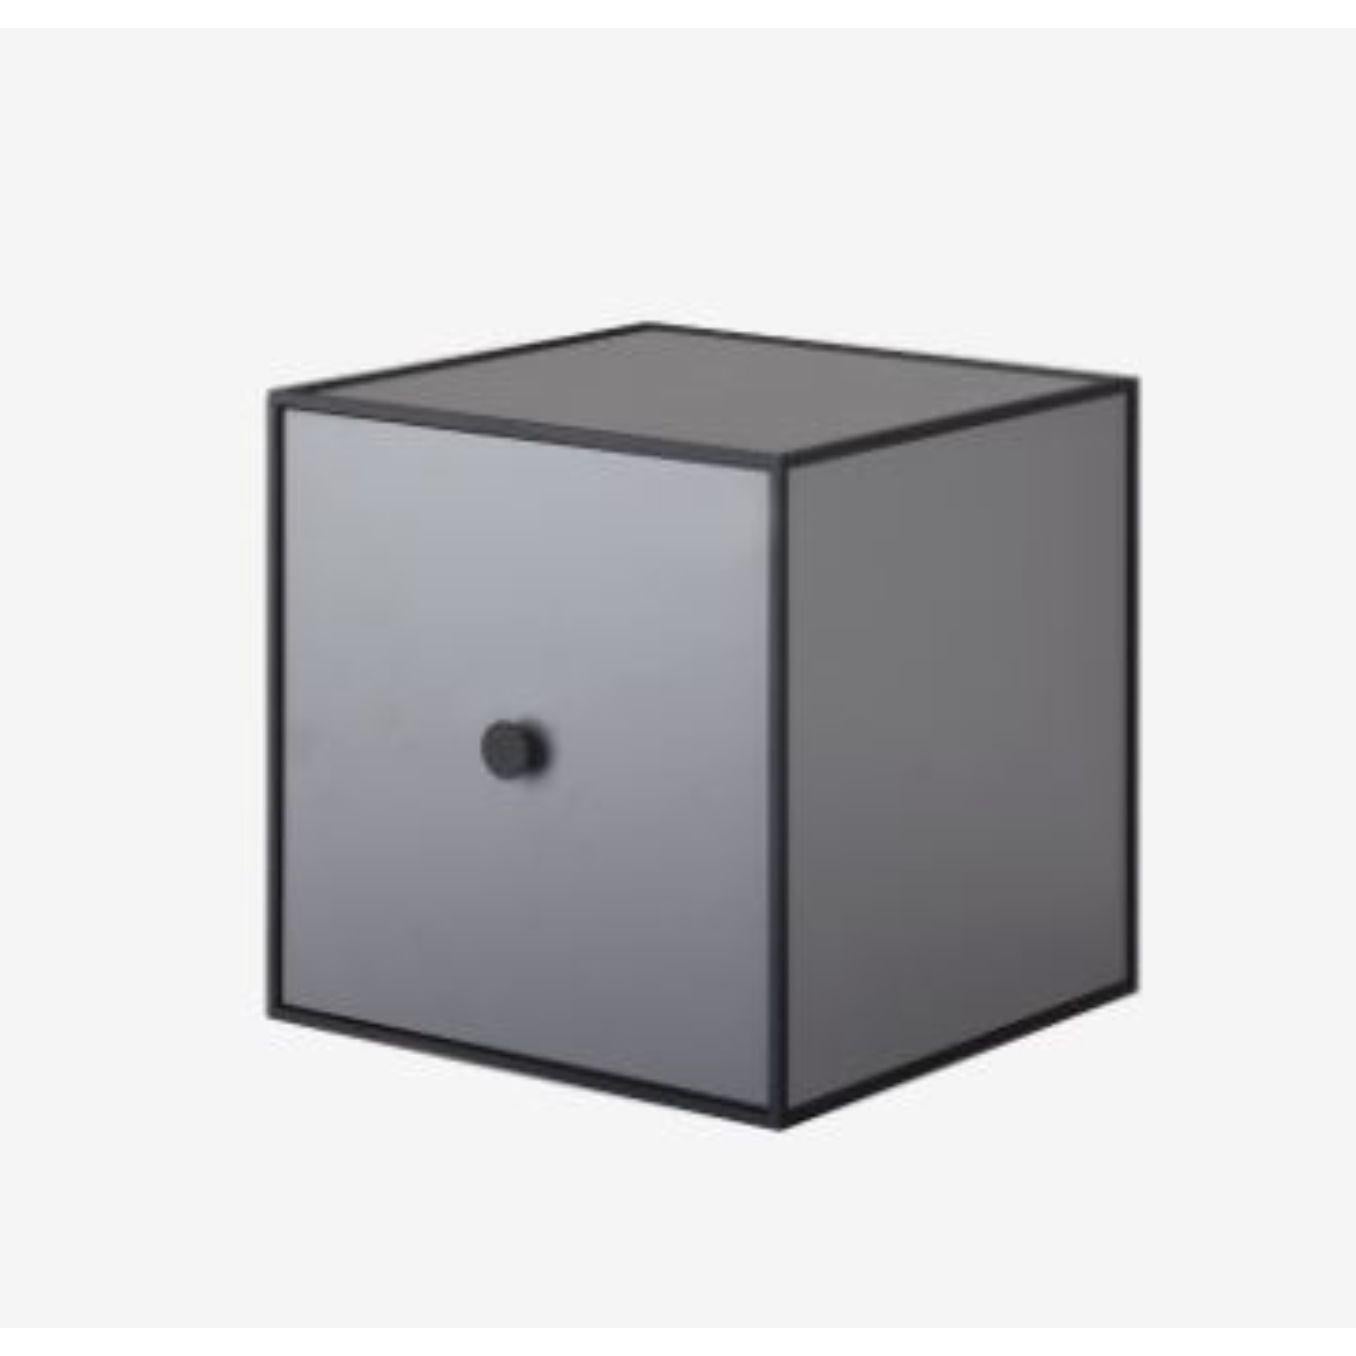 28 Dark grey frame box with door by Lassen
Dimensions: W 28 x D 28 x H 28 cm 
Materials: finér, melamin, melamin, melamine, metal, veneer
Also available in different colors and dimensions. 

By Lassen is a Danish design brand focused on iconic